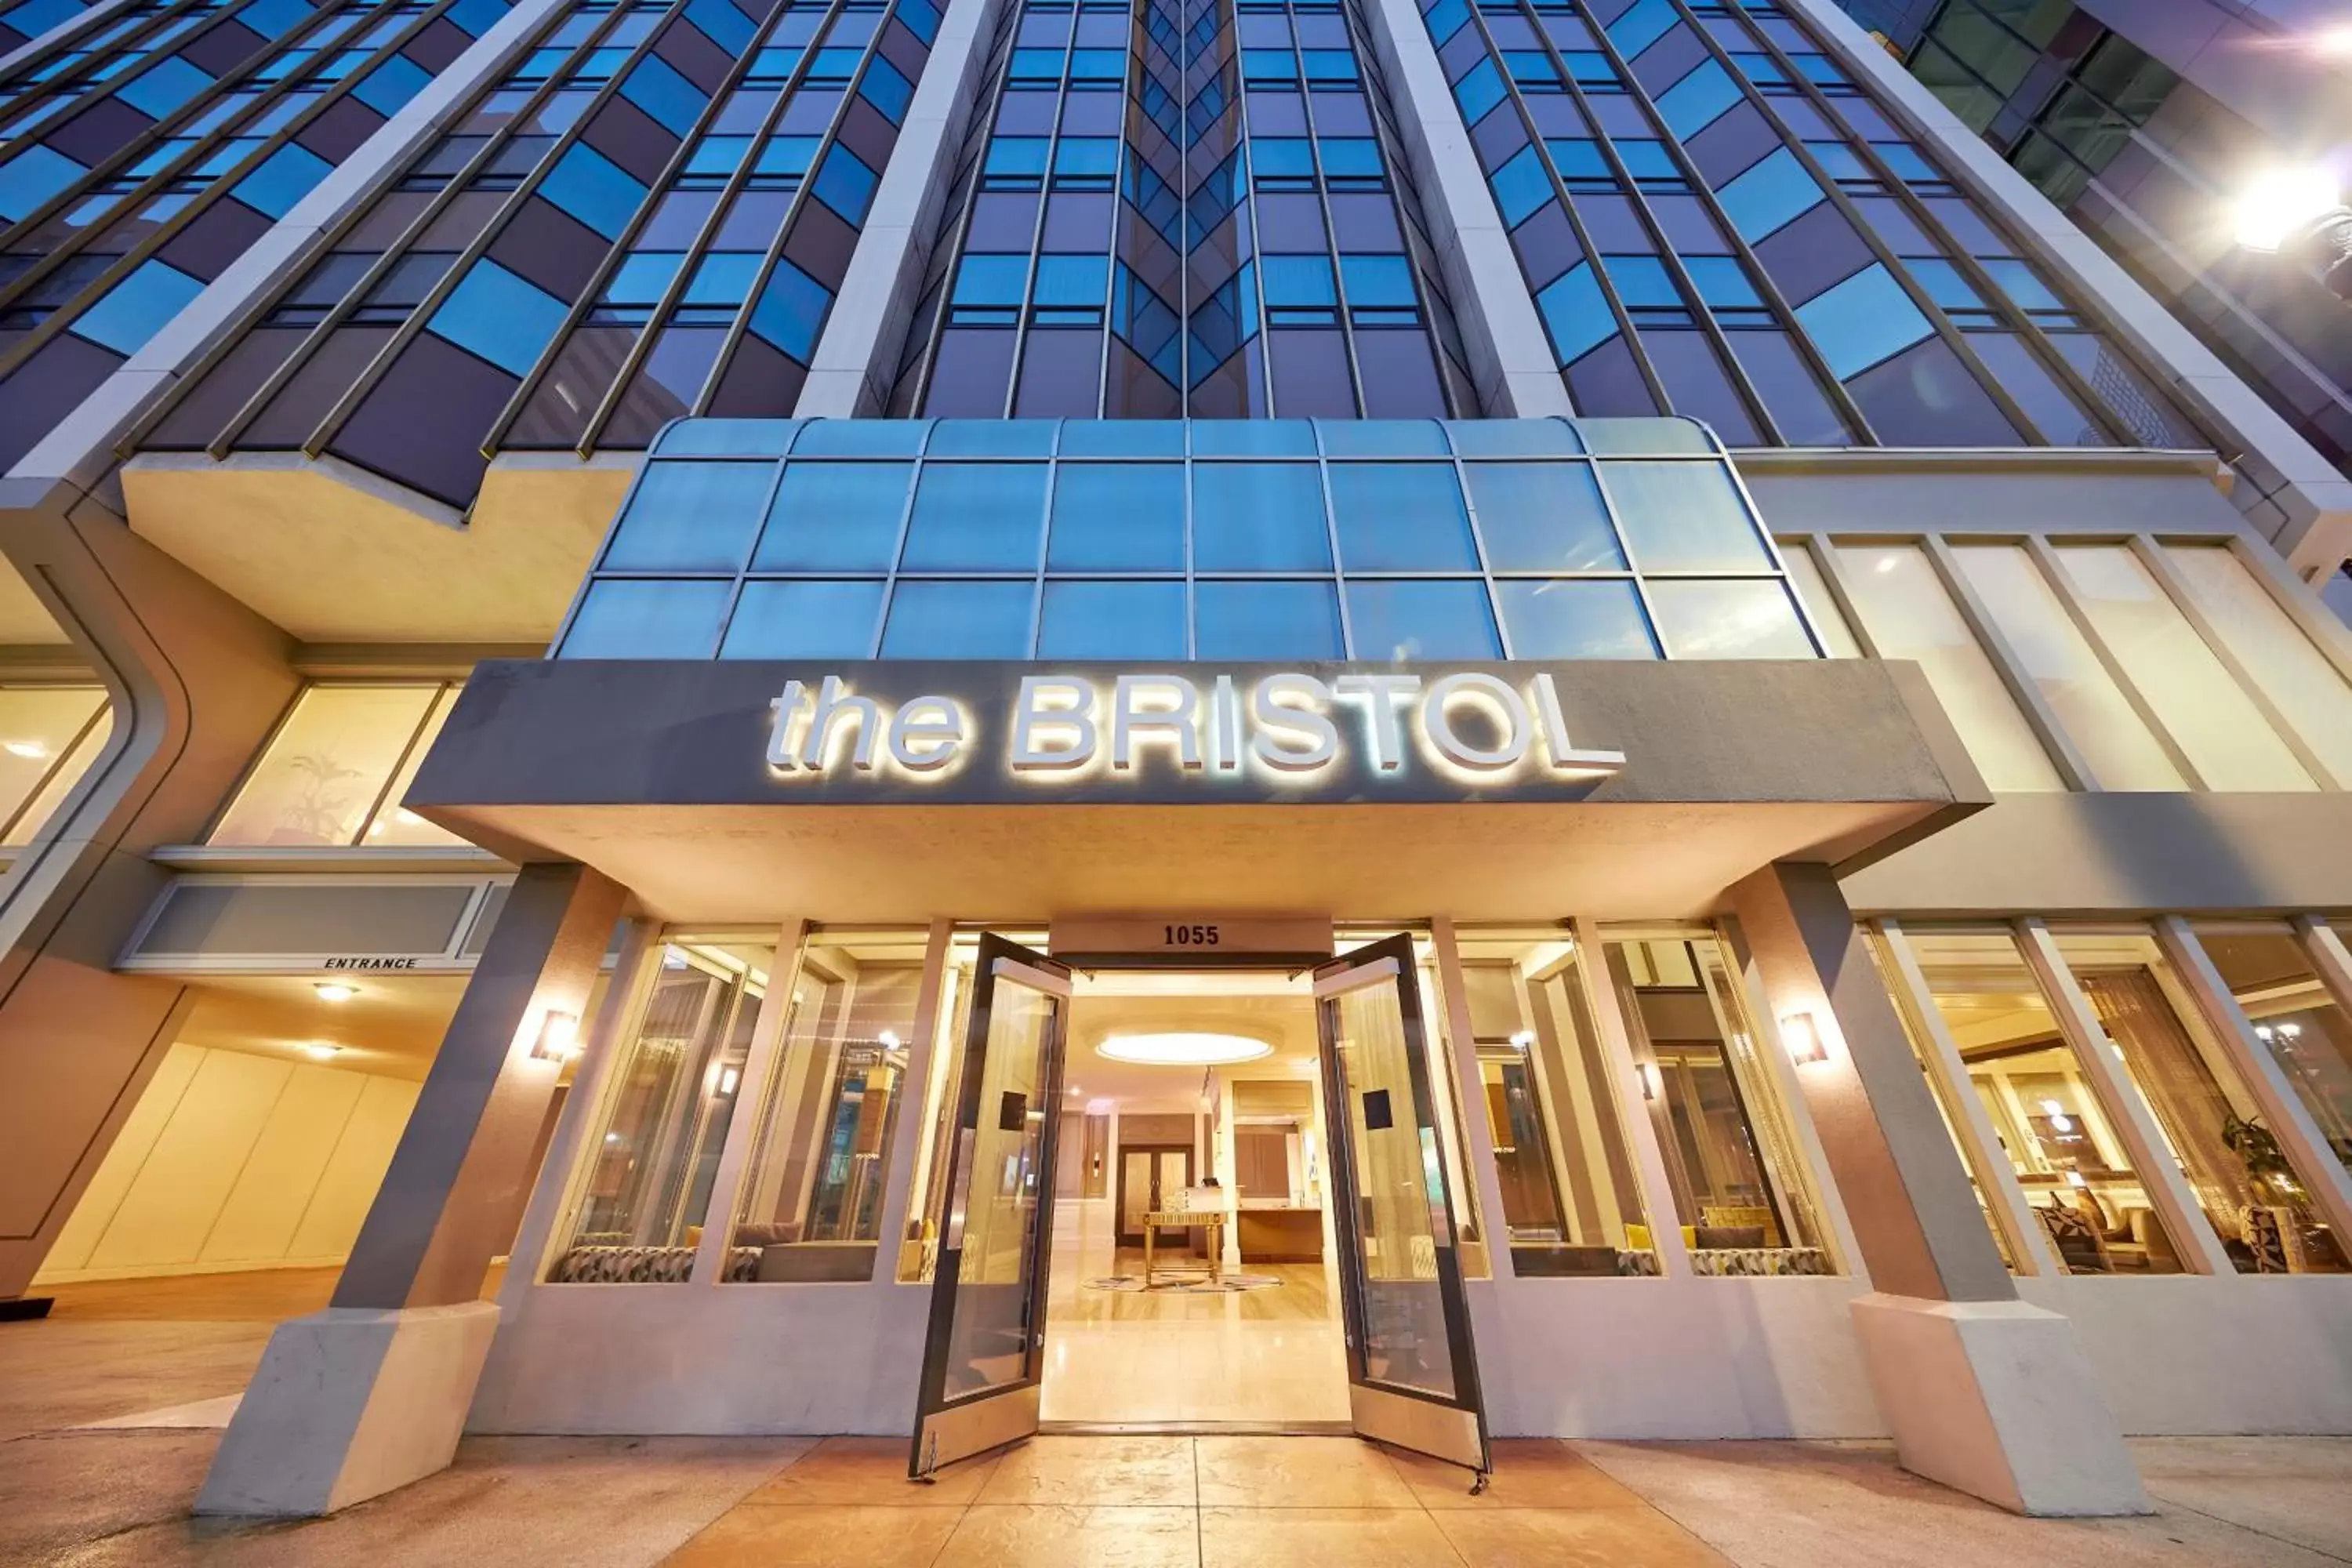 Property building in The Bristol Hotel San Diego